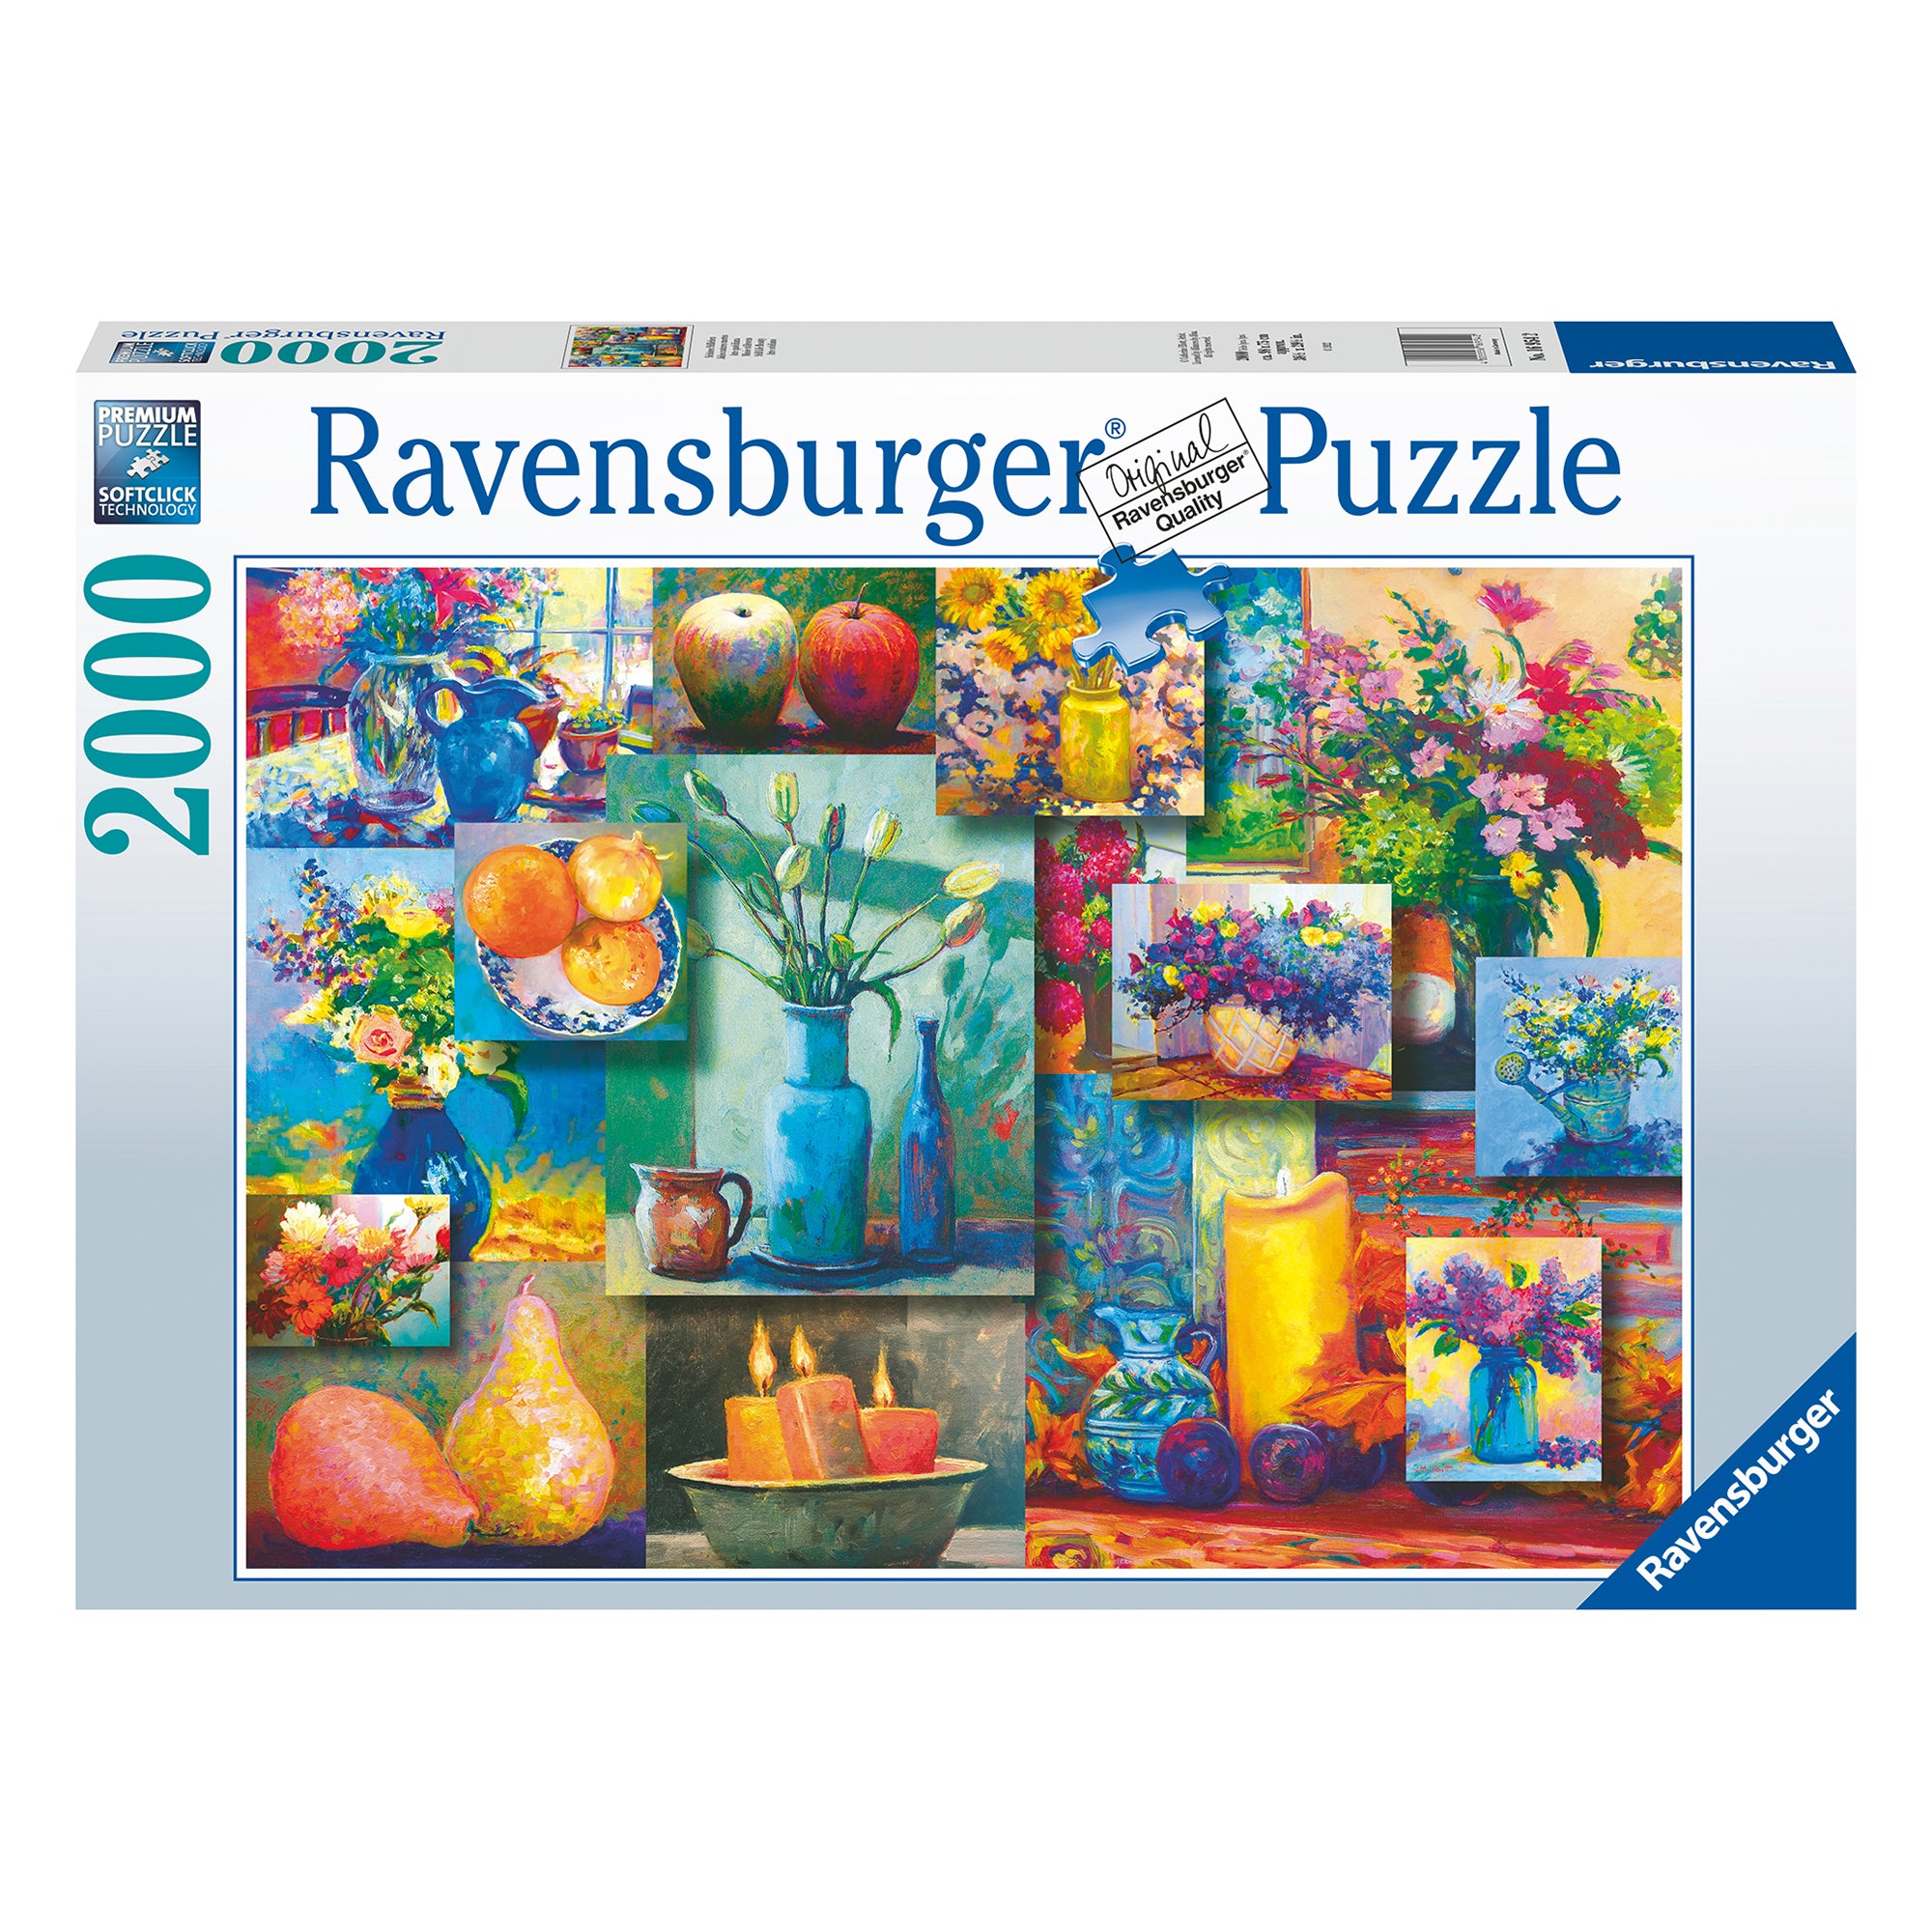 Ravensburger 16005 Tranquil Tigers 1500 Piece Puzzle for Adults - Every  Piece is Unique, Softclick Technology Means Pieces Fit Together Perfectly